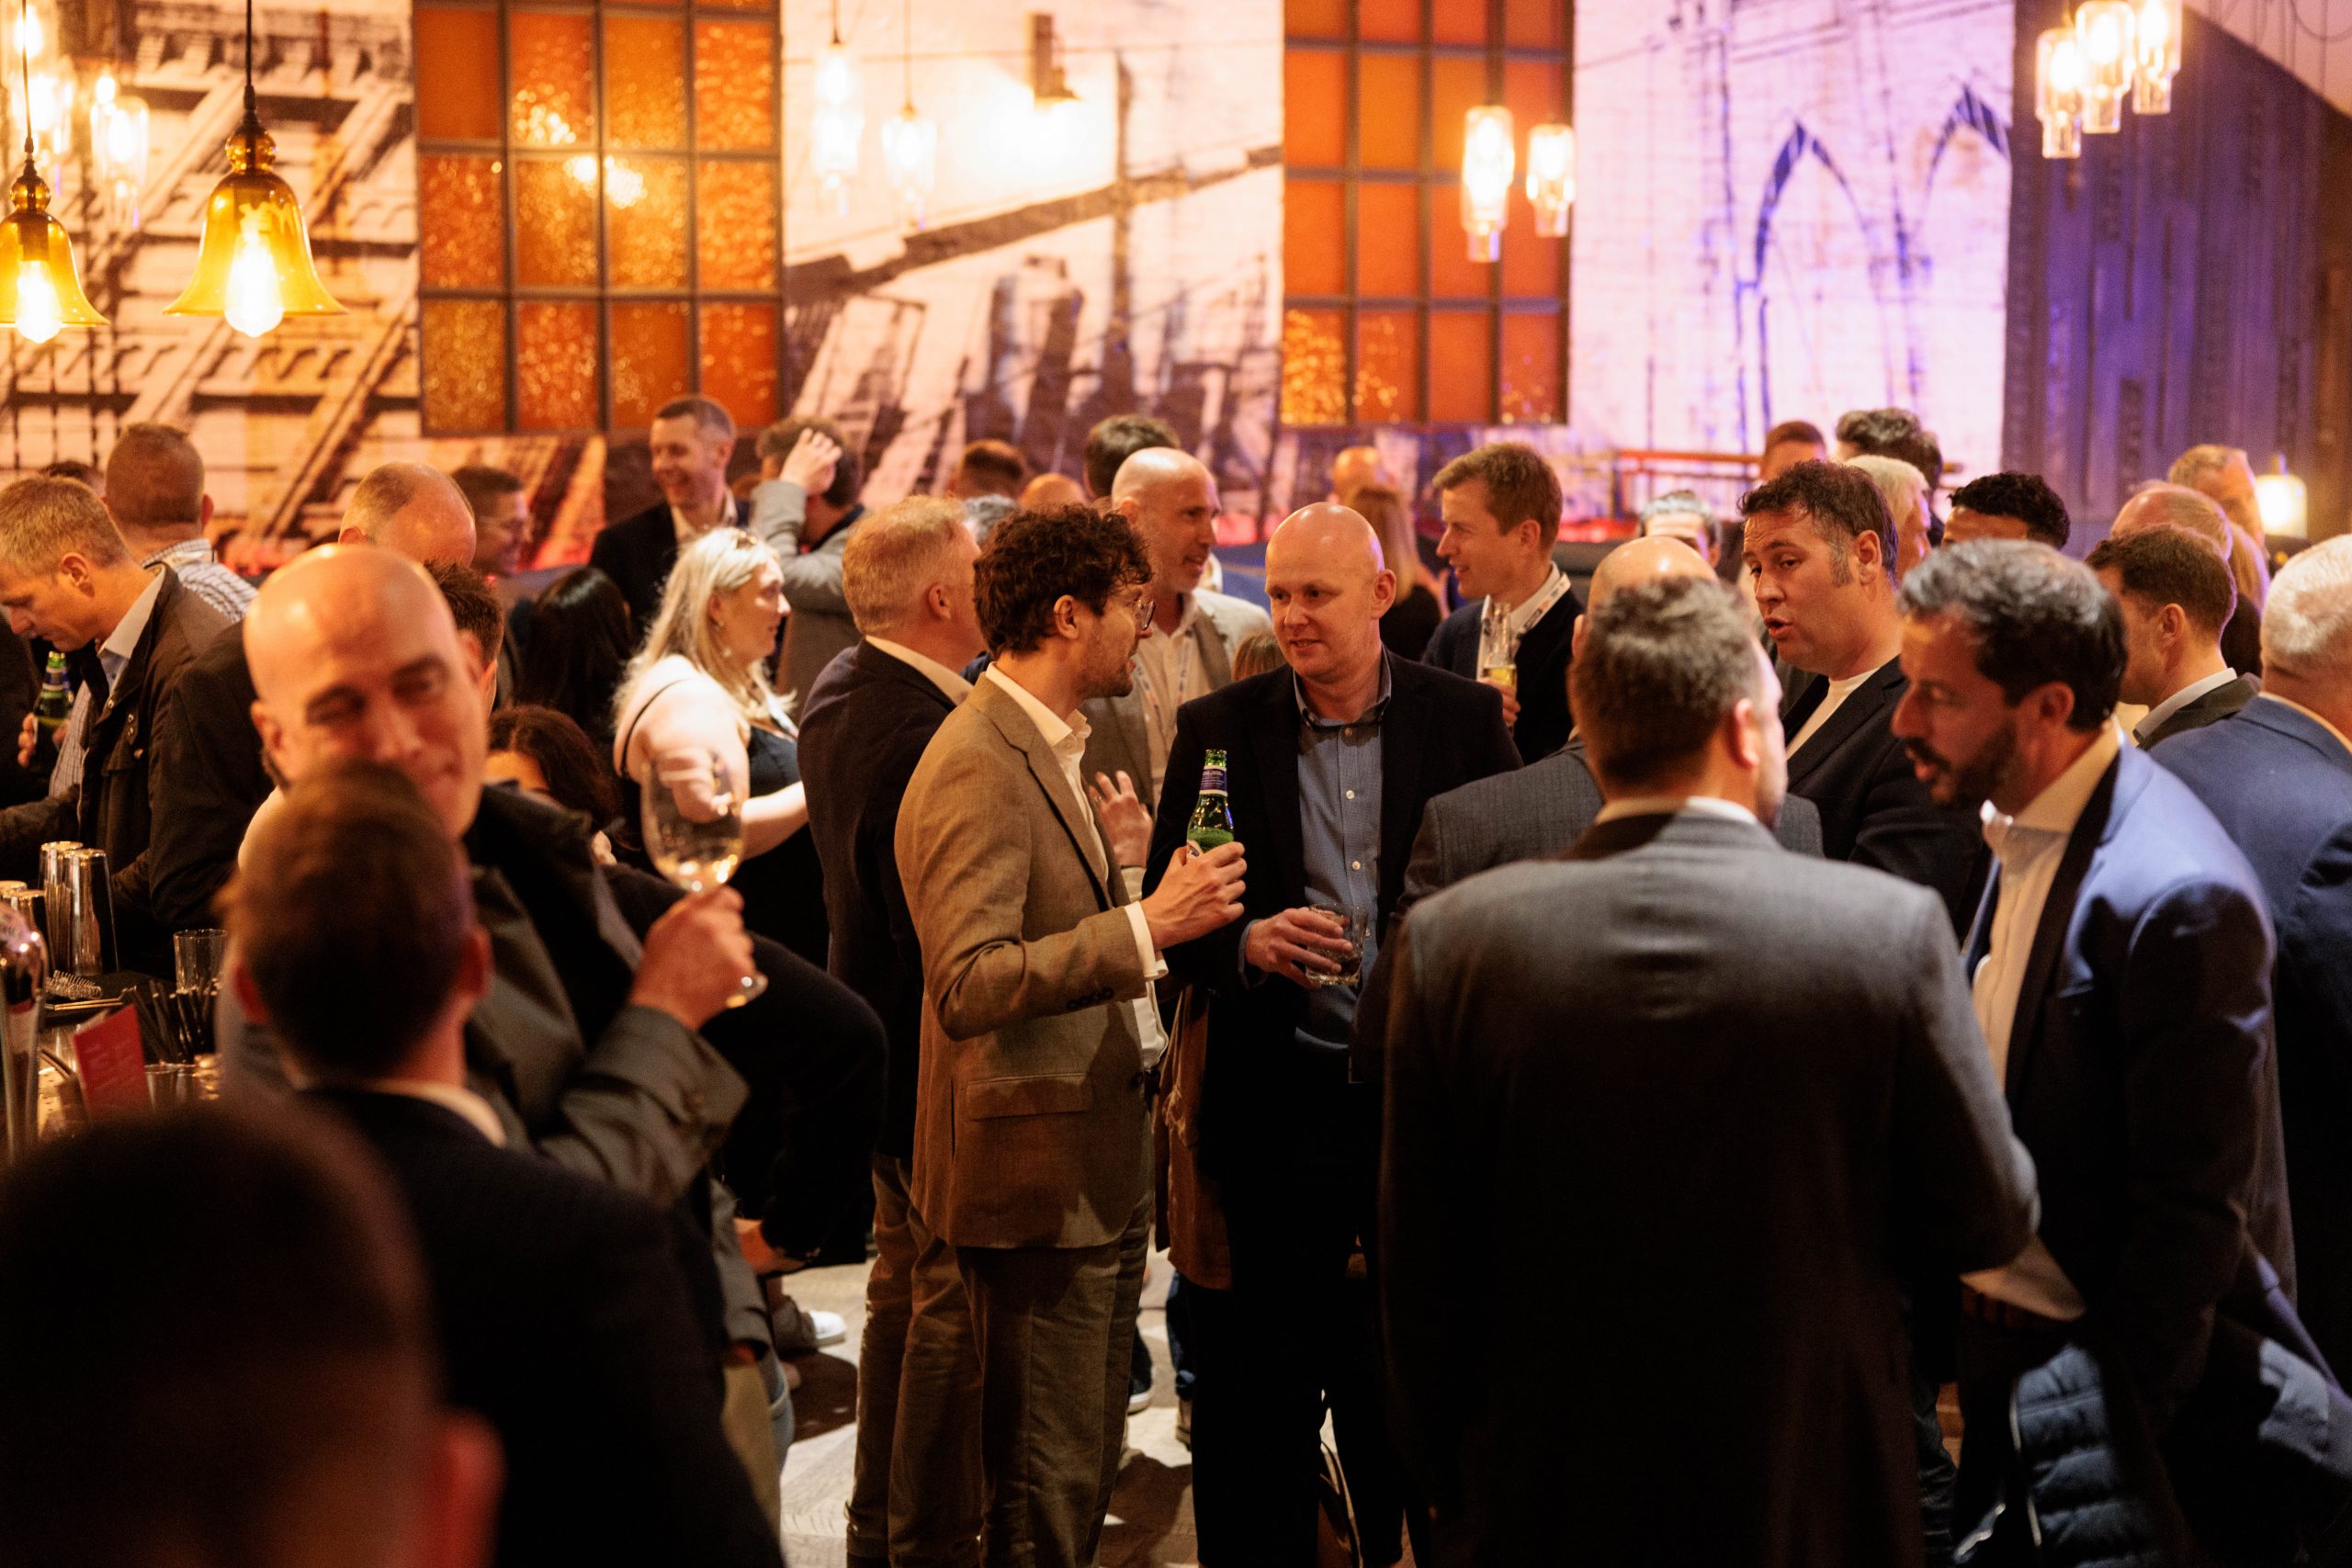 A business event with various business owners regarding the connect & collaborate: summer drinks in manchester event